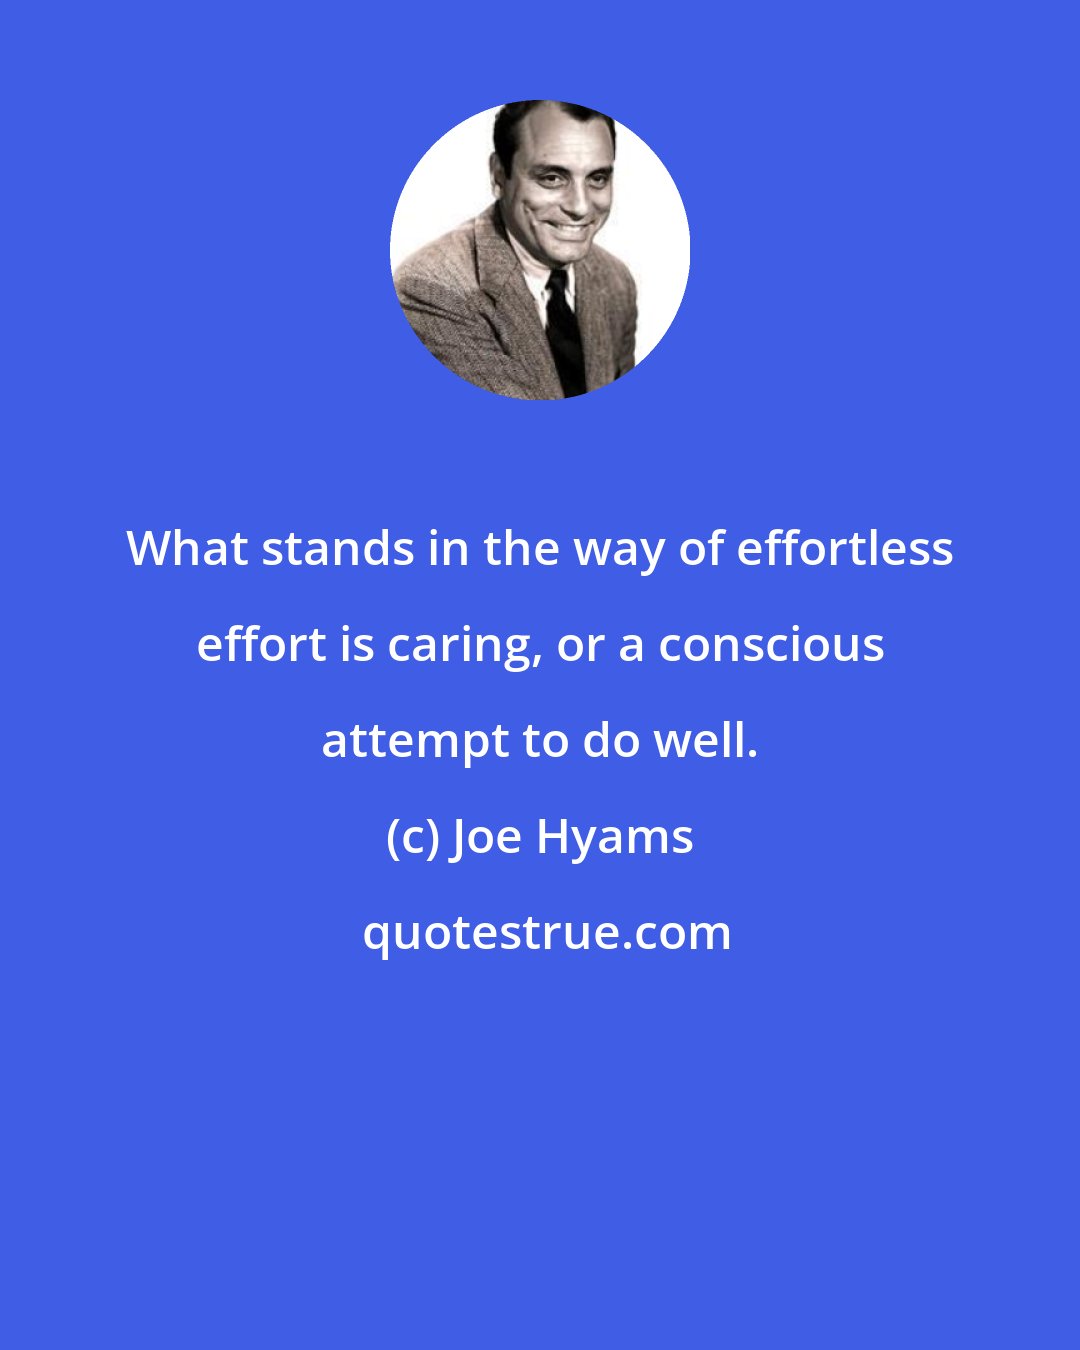 Joe Hyams: What stands in the way of effortless effort is caring, or a conscious attempt to do well.